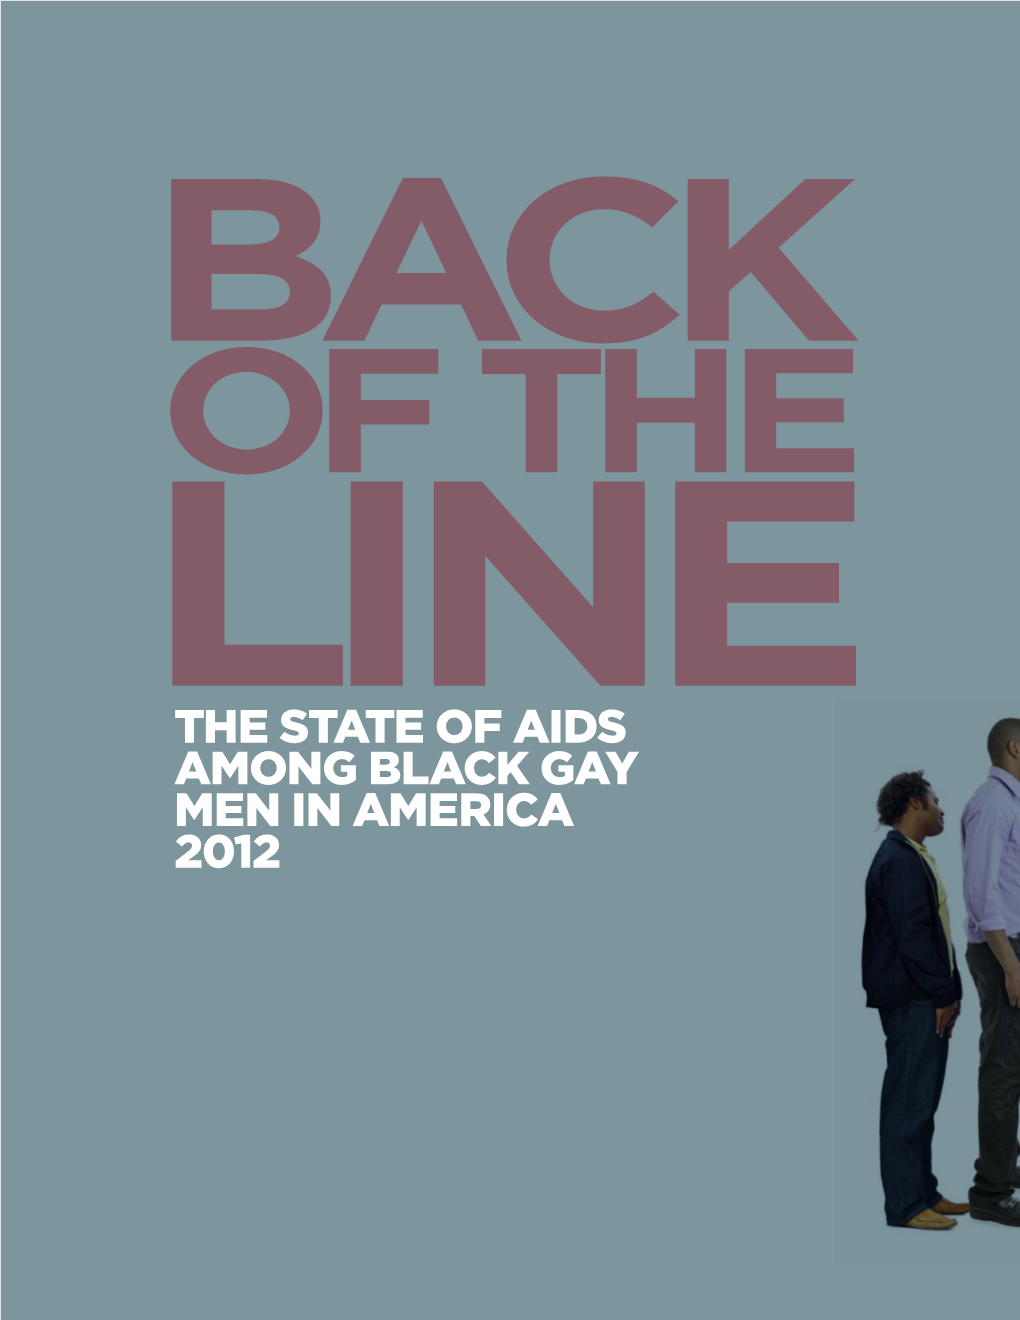 The State of Aids Among Black Gay Men in America 2012